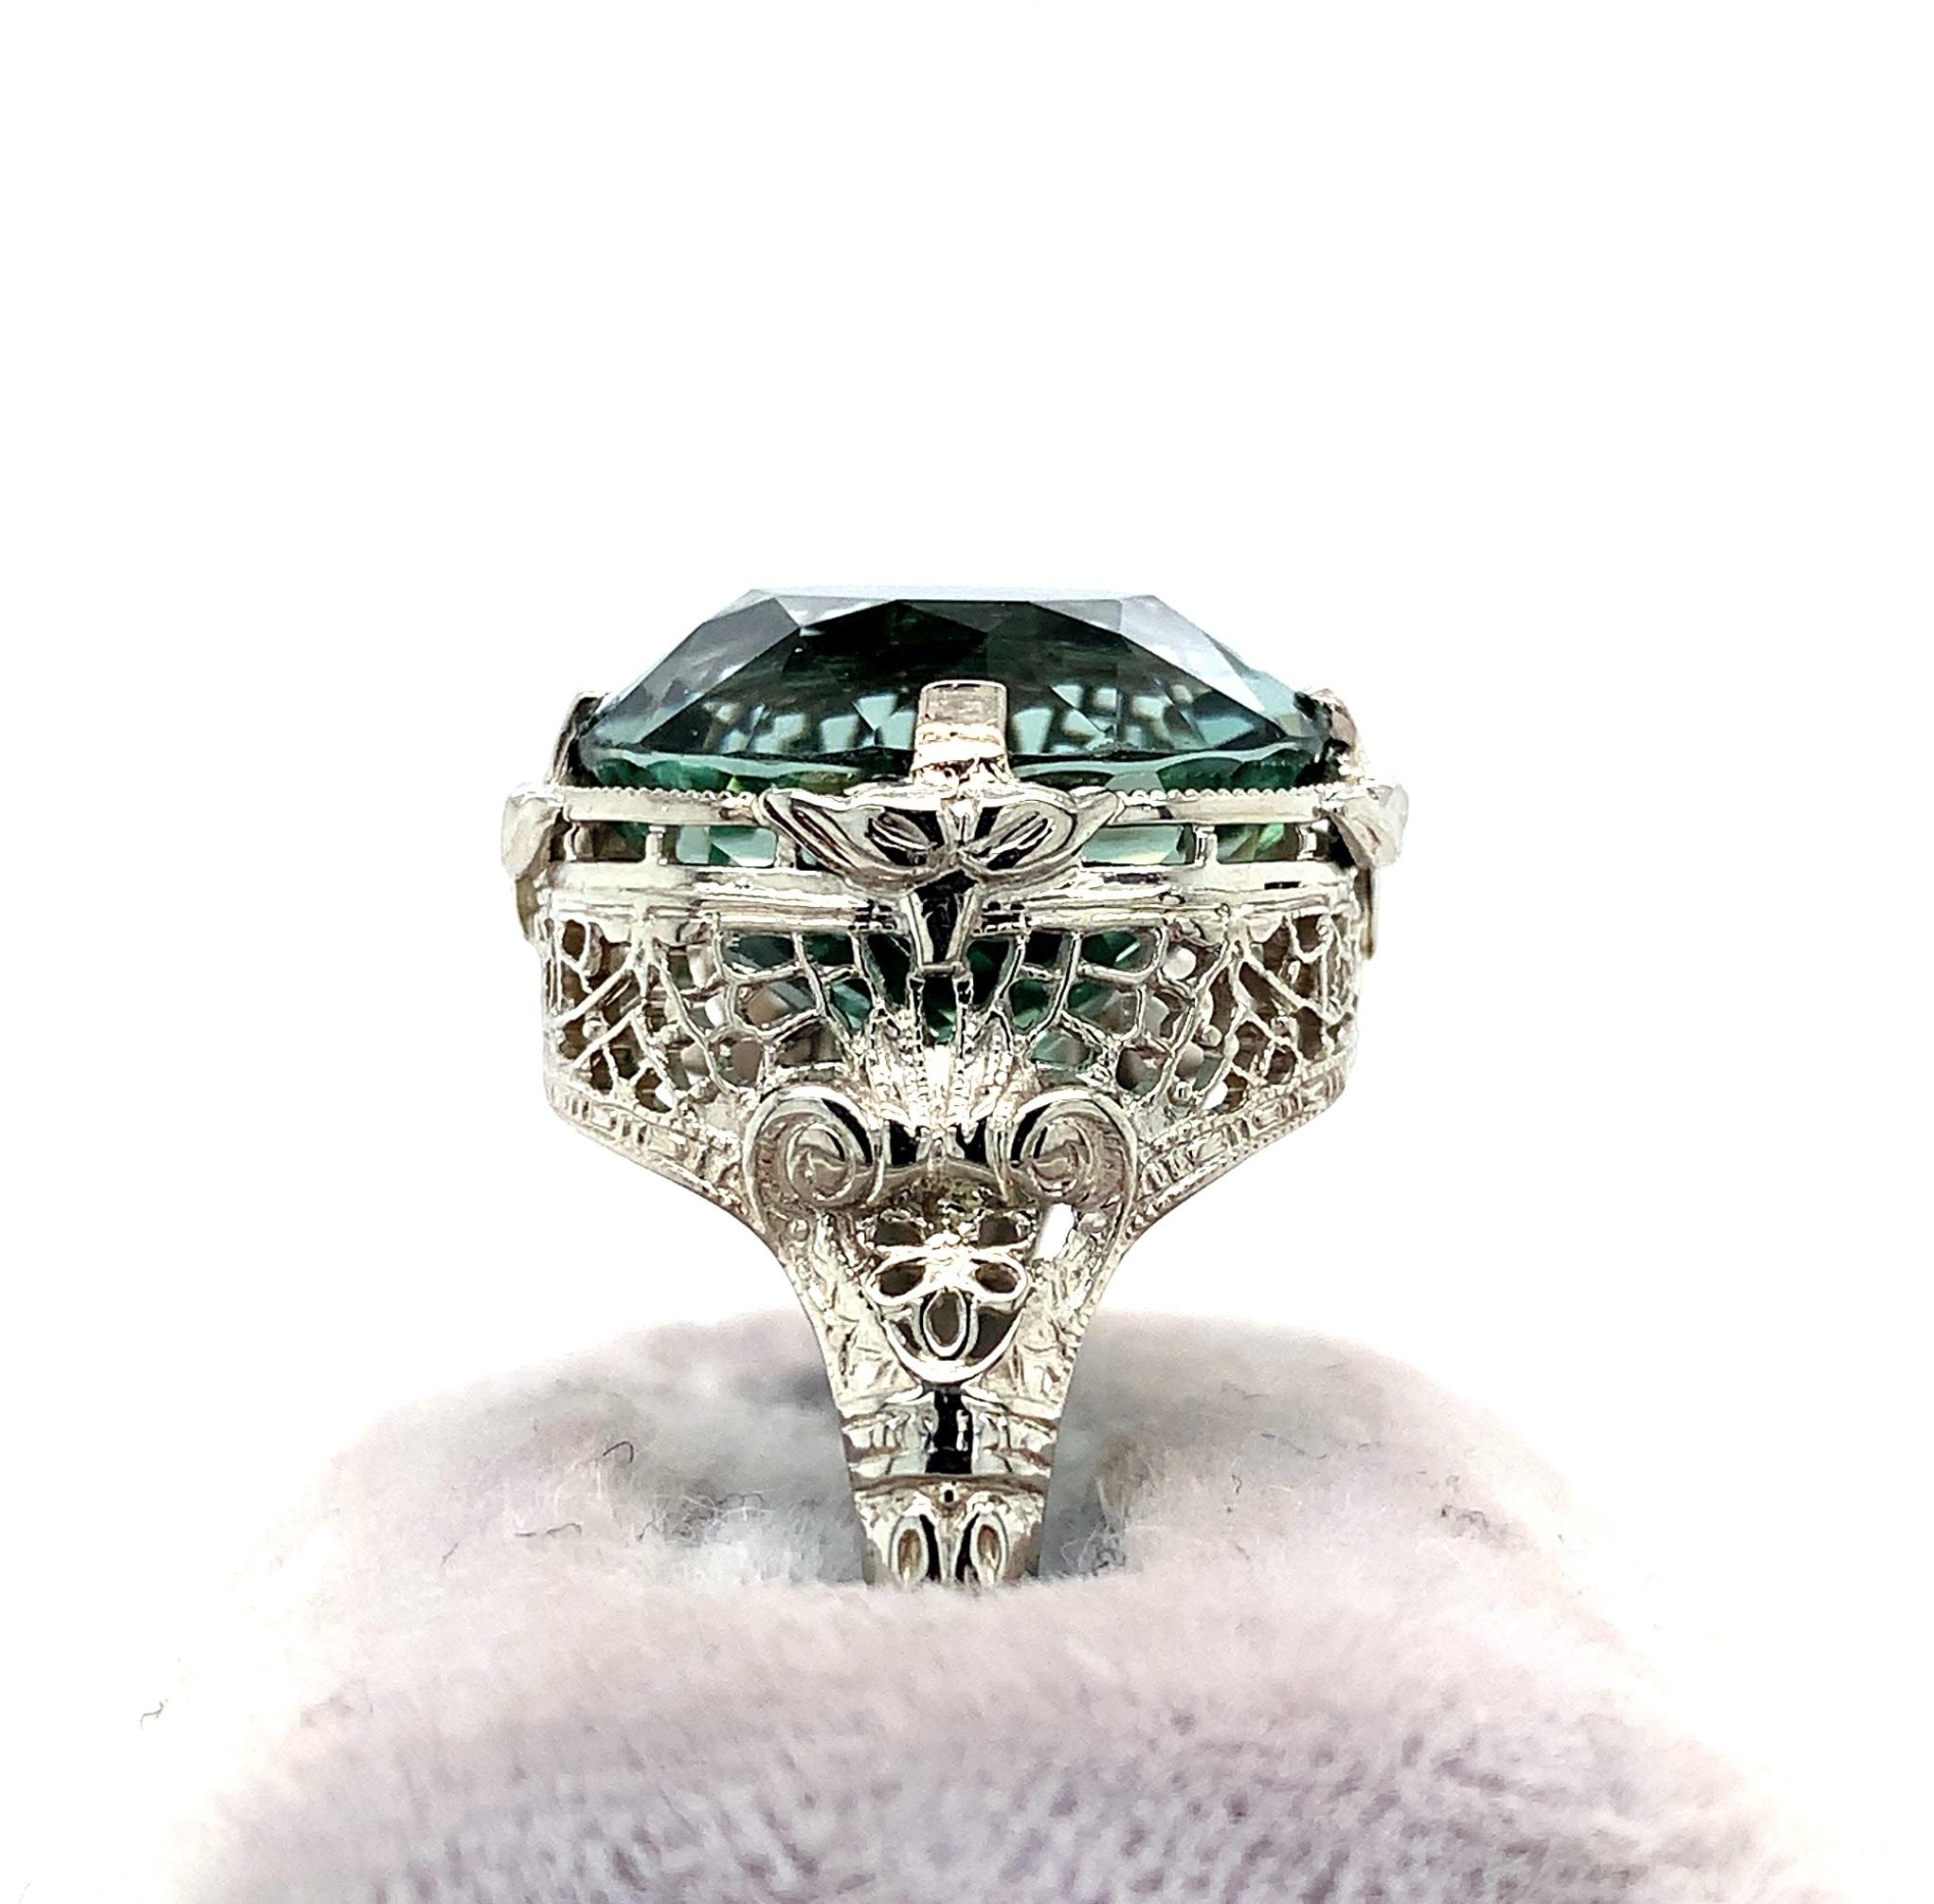  14K white gold filigree ring featuring a huge green tourmaline weighing 12.21 carats. The tourmaline has a blue-green teal color. It is oval brilliant cut with extra faceting and measures about 15mm x 12mm. The ring fits a size 8 3/4 finger and